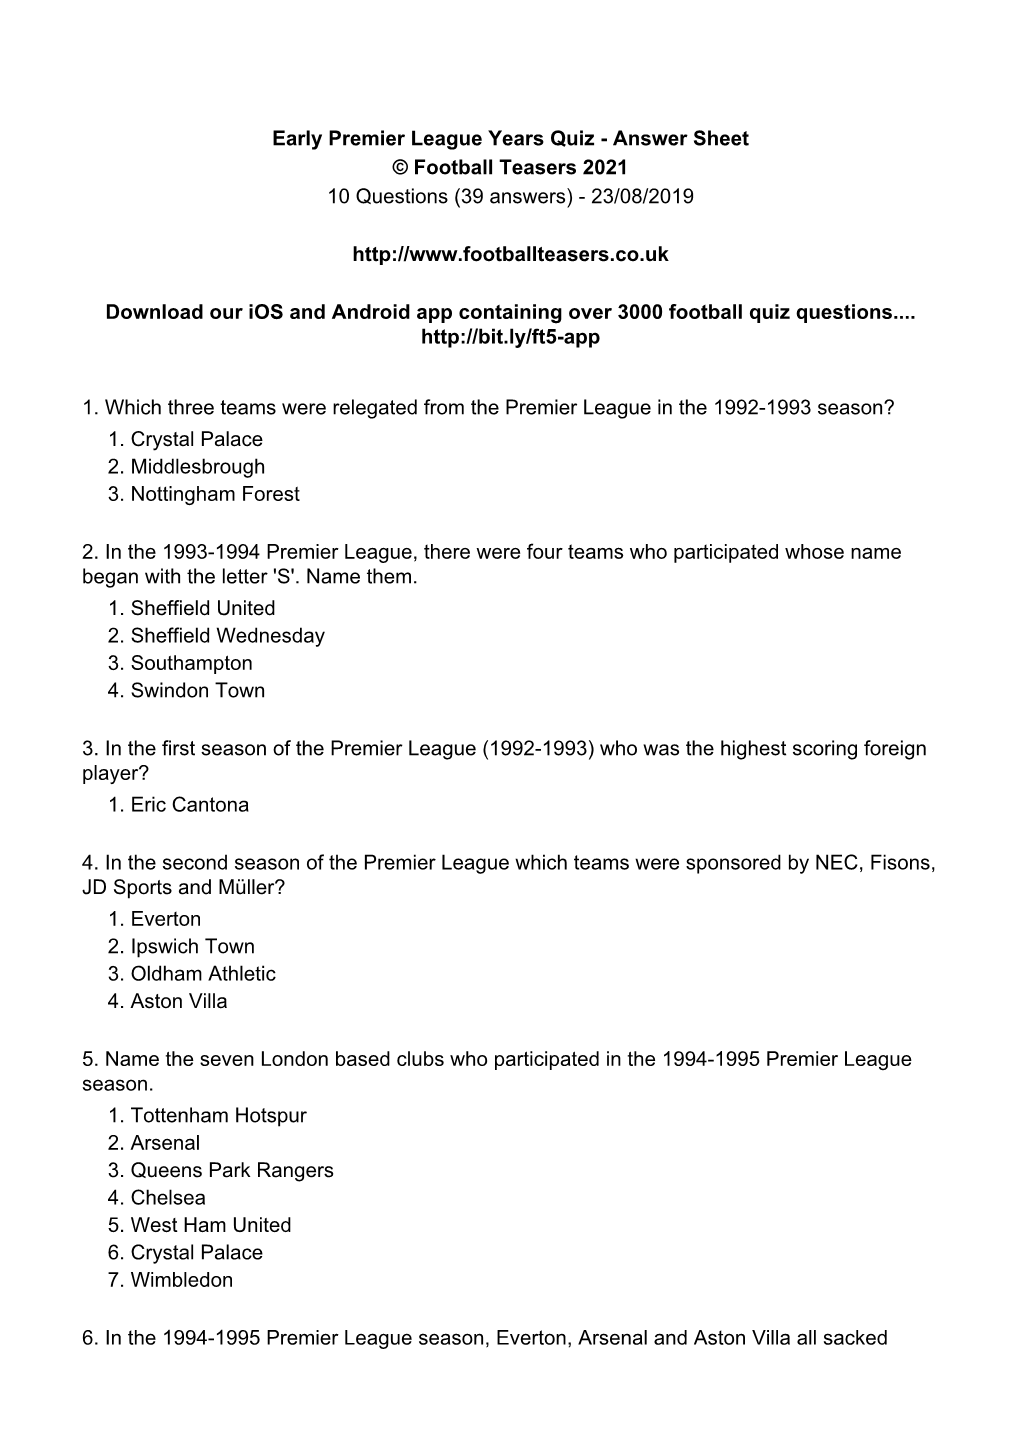 Early Premier League Years Quiz - Answer Sheet © Football Teasers 2021 10 Questions (39 Answers) - 23/08/2019